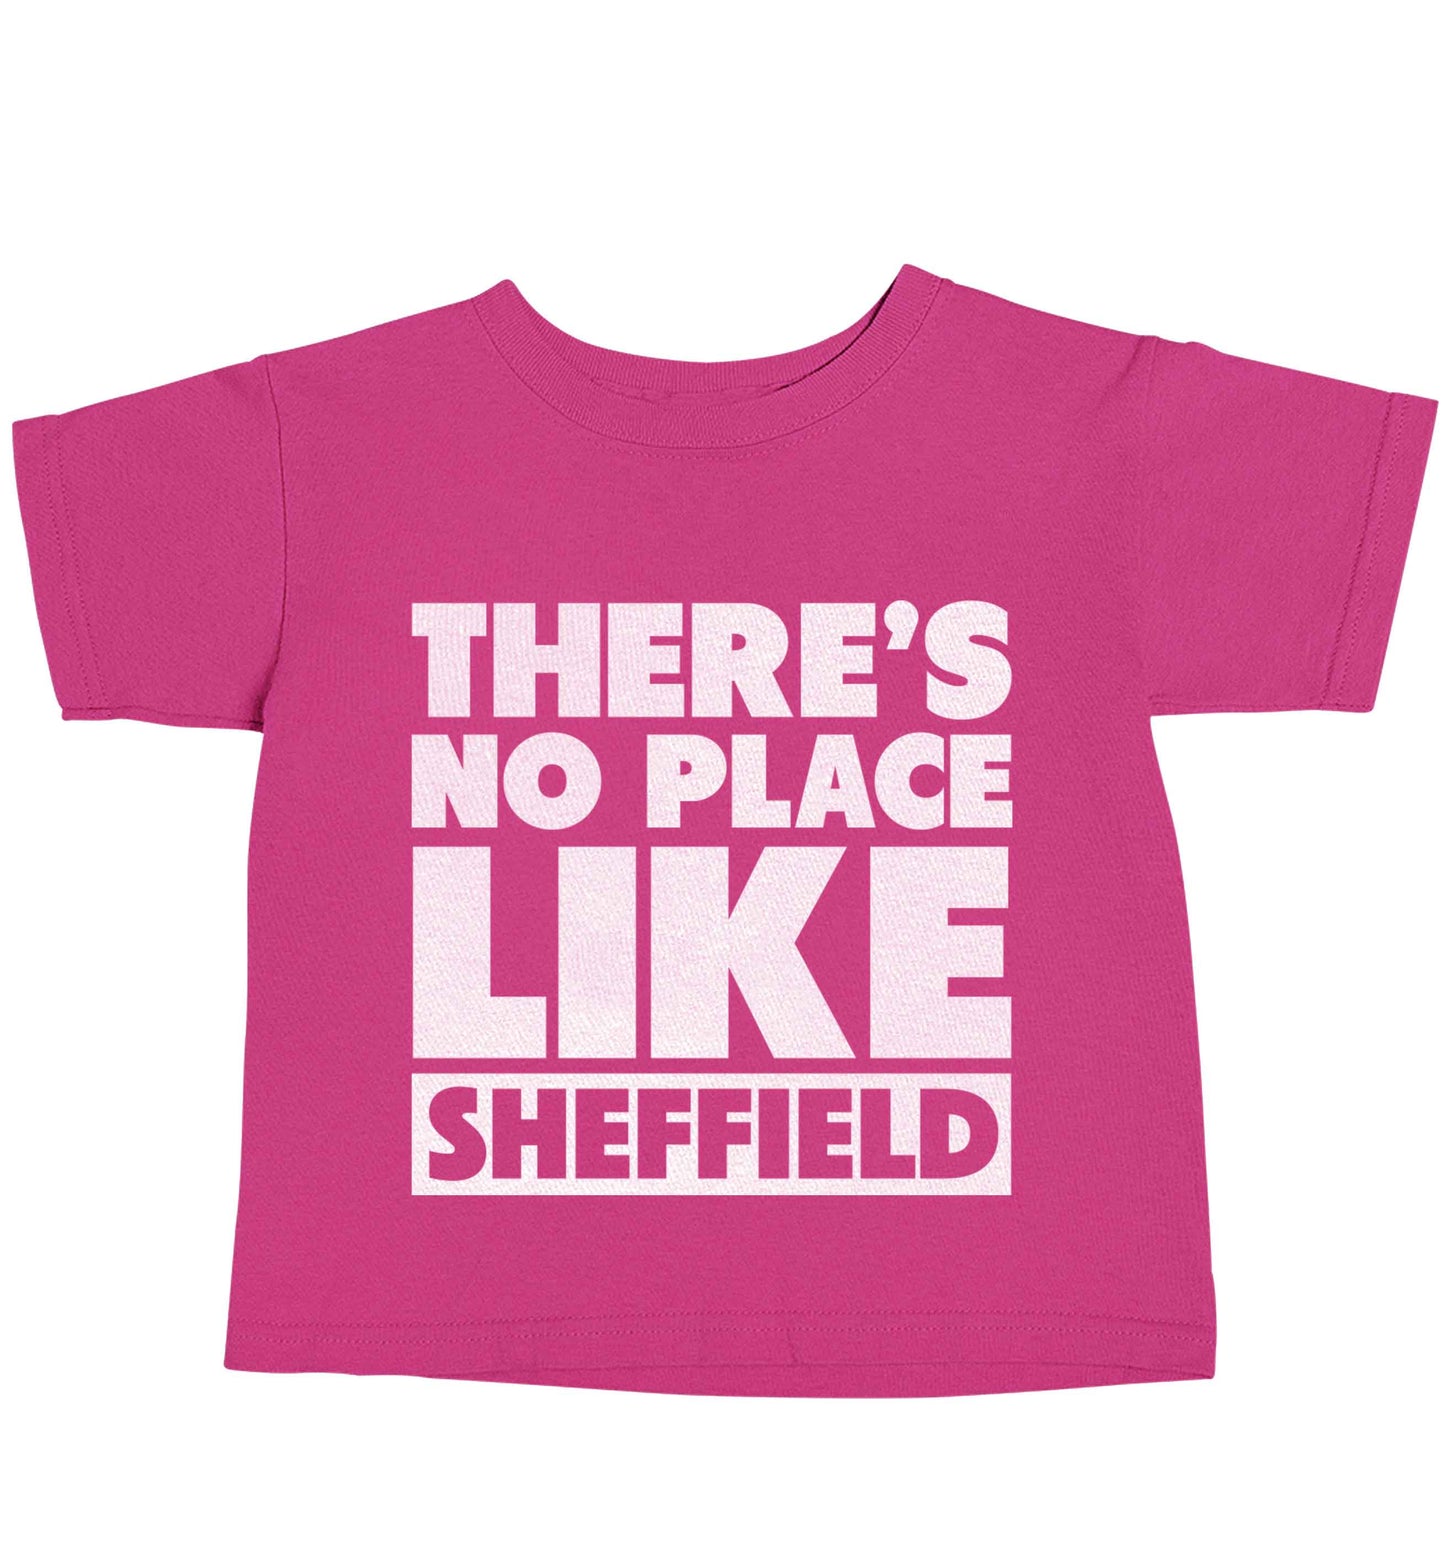 There's no place like Sheffield pink baby toddler Tshirt 2 Years